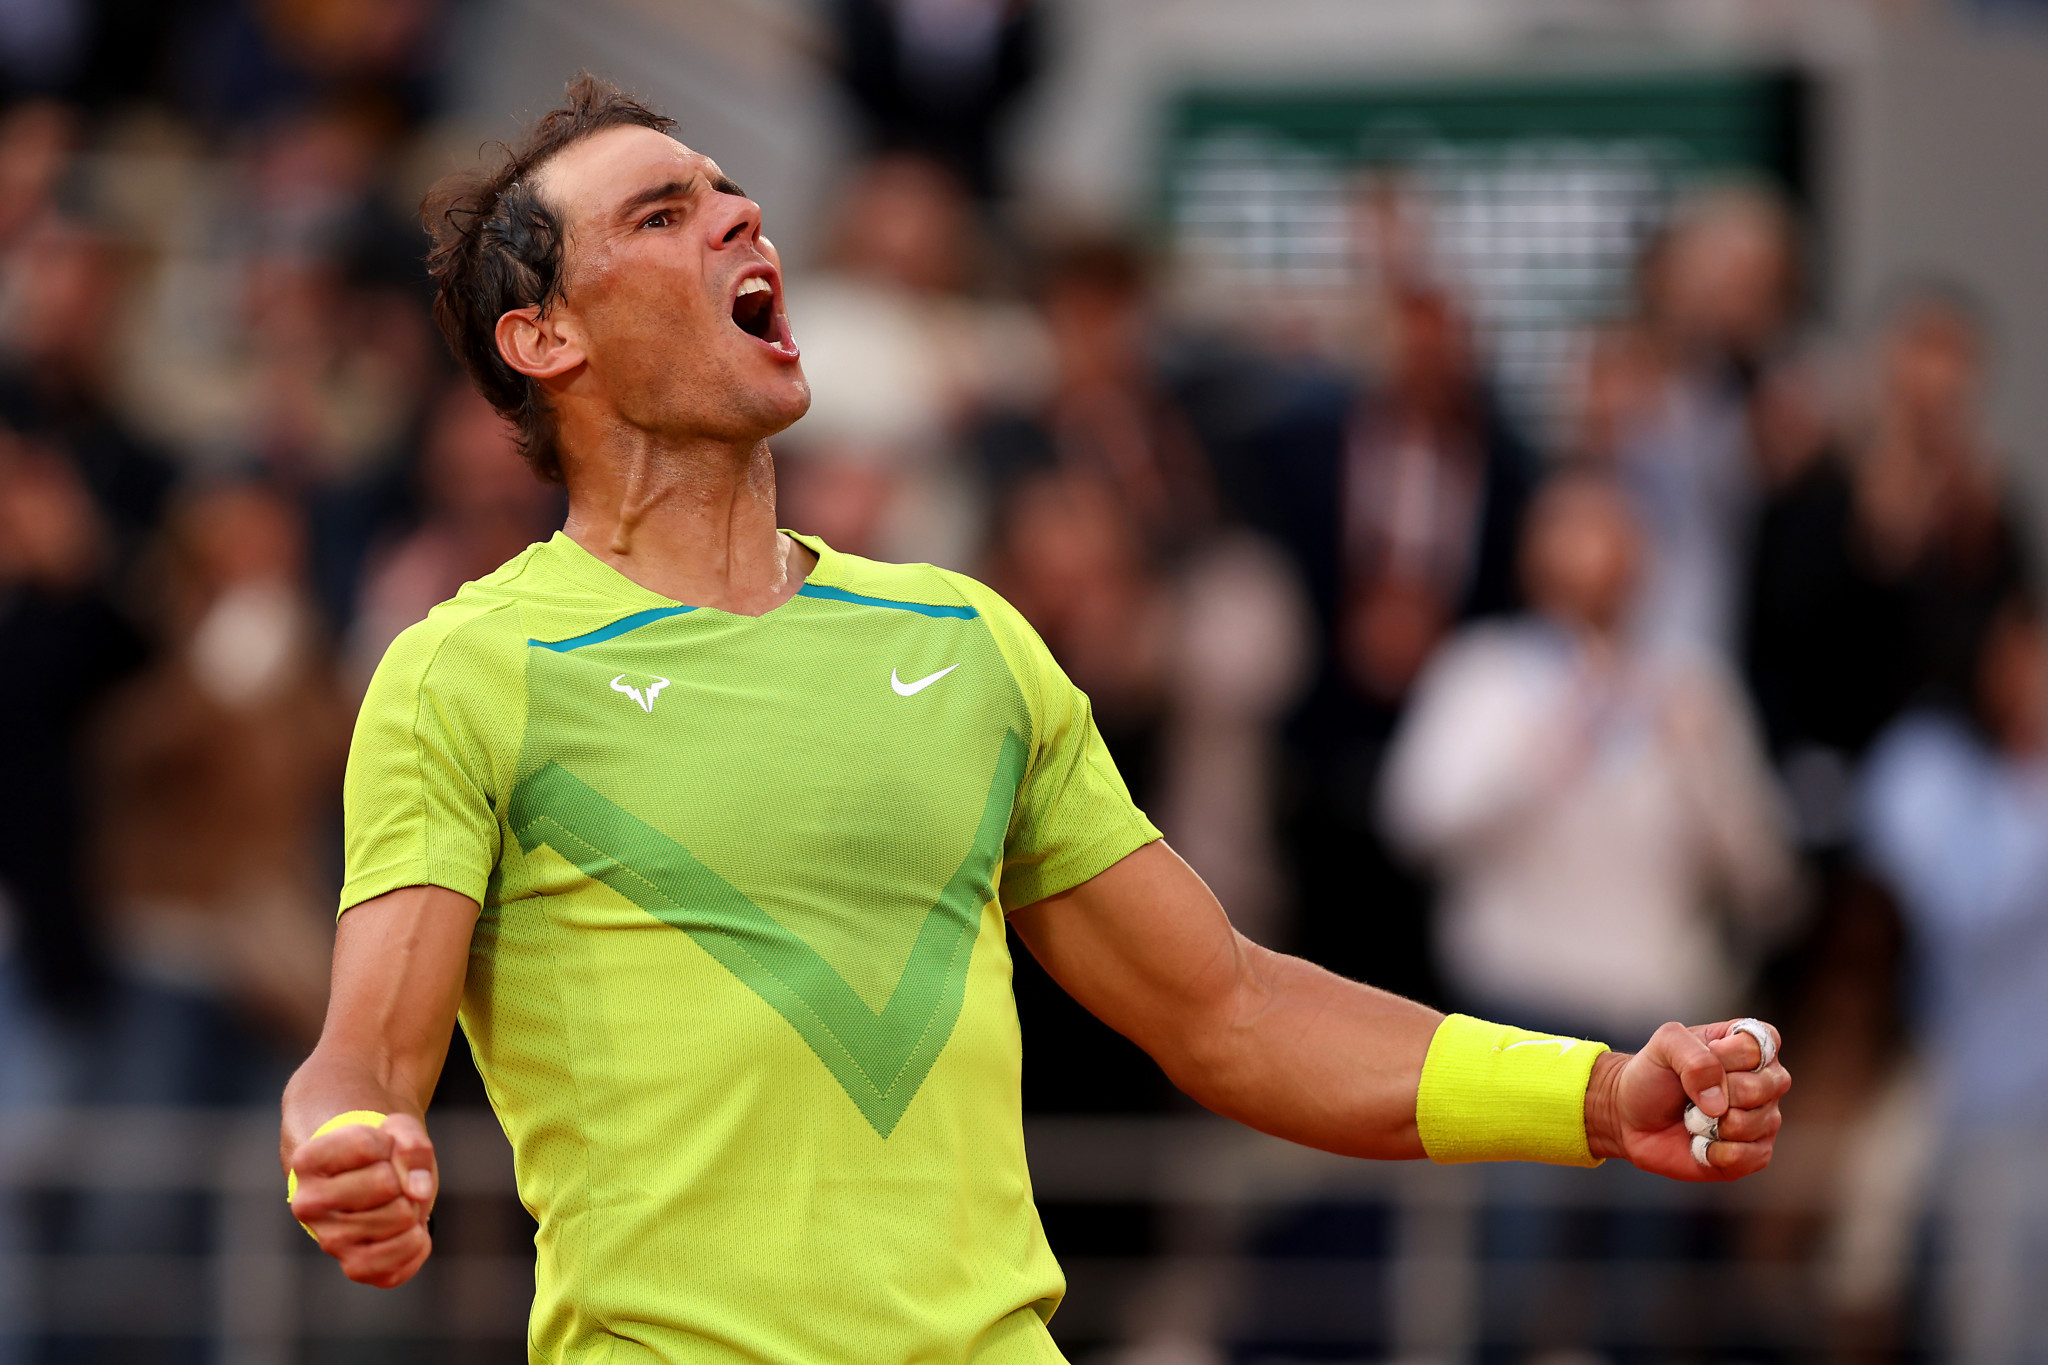 Thirteen-time French Open champion Nadal pushed all the way by Auger-Aliassime in fourth round